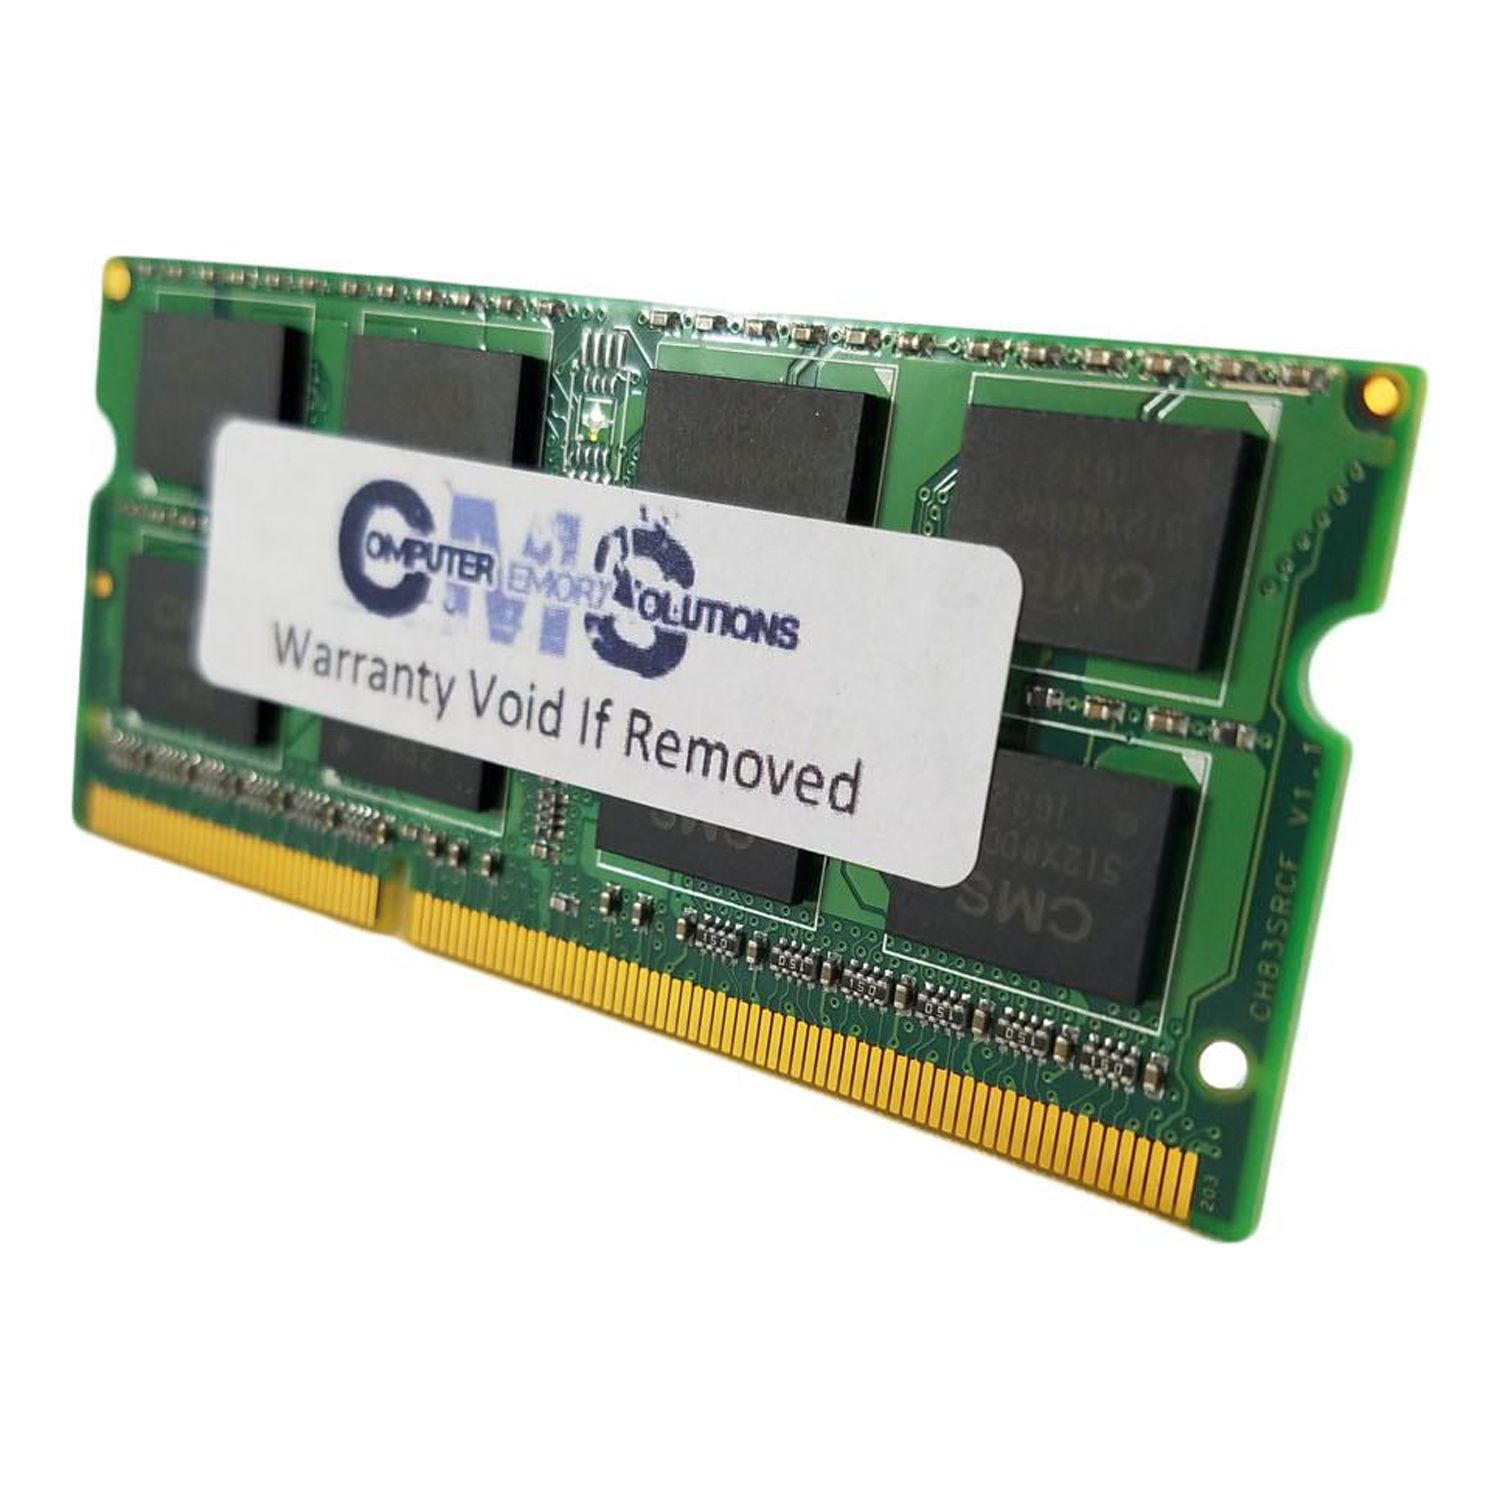 CMS 2GB (1X2GB) DDR3 8500 1066MHZ NON ECC SODIMM Memory Ram Compatible with Asus/Asmobile Eee Pc X101Ch-Eu17-Wt 10.1" Netbook - B123 - image 3 of 3